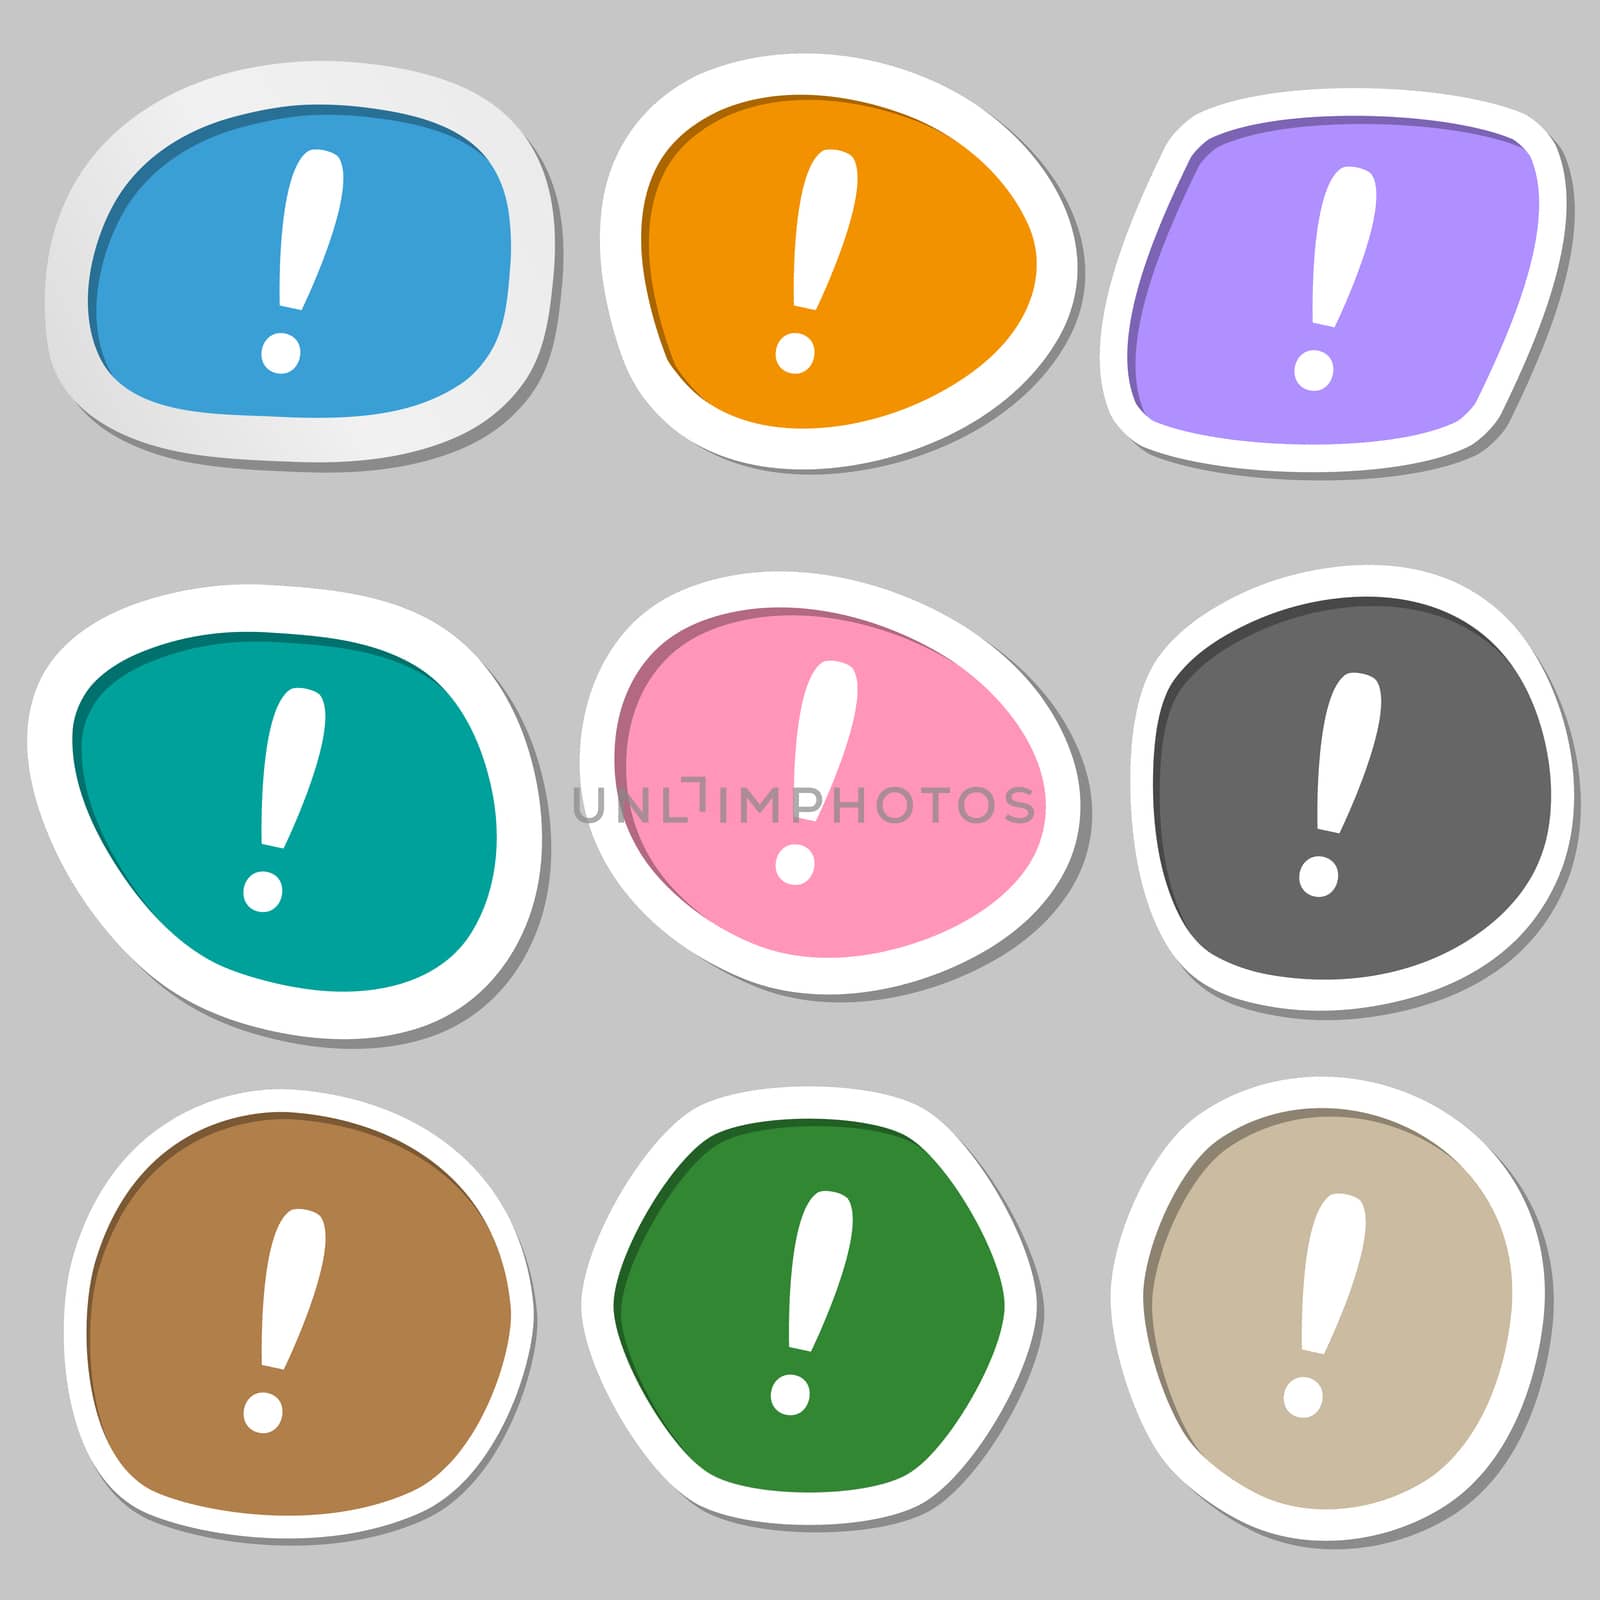 Exclamation mark sign icon. Attention speech bubble symbol. Multicolored paper stickers. illustration